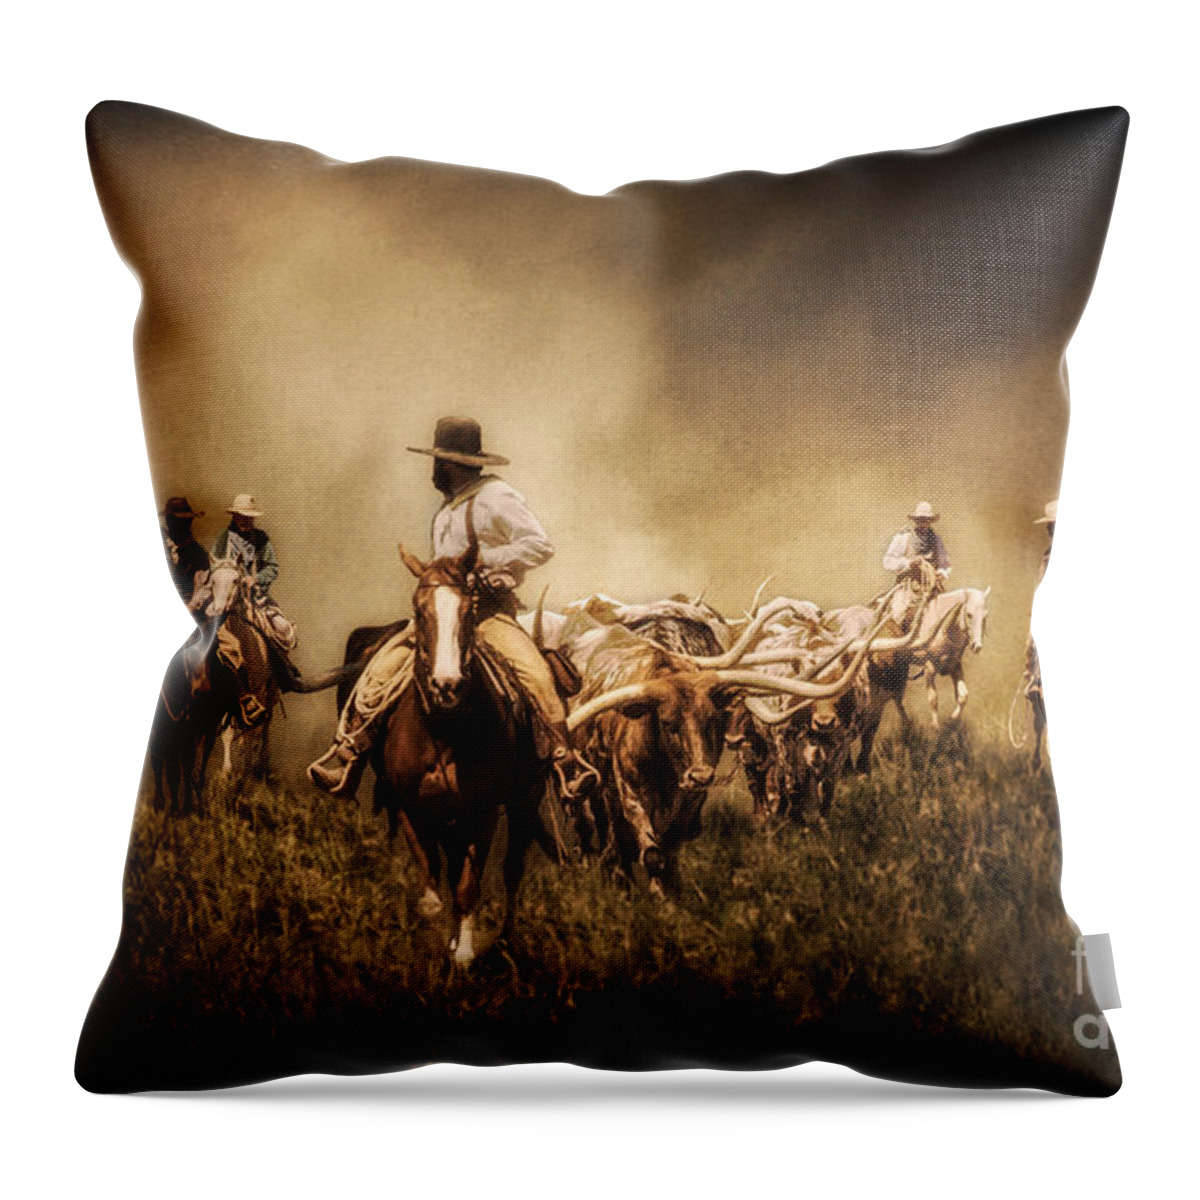 Sunrise Cattle Drive Throw Pillow featuring the photograph Sunrise Cattle Drive by Priscilla Burgers